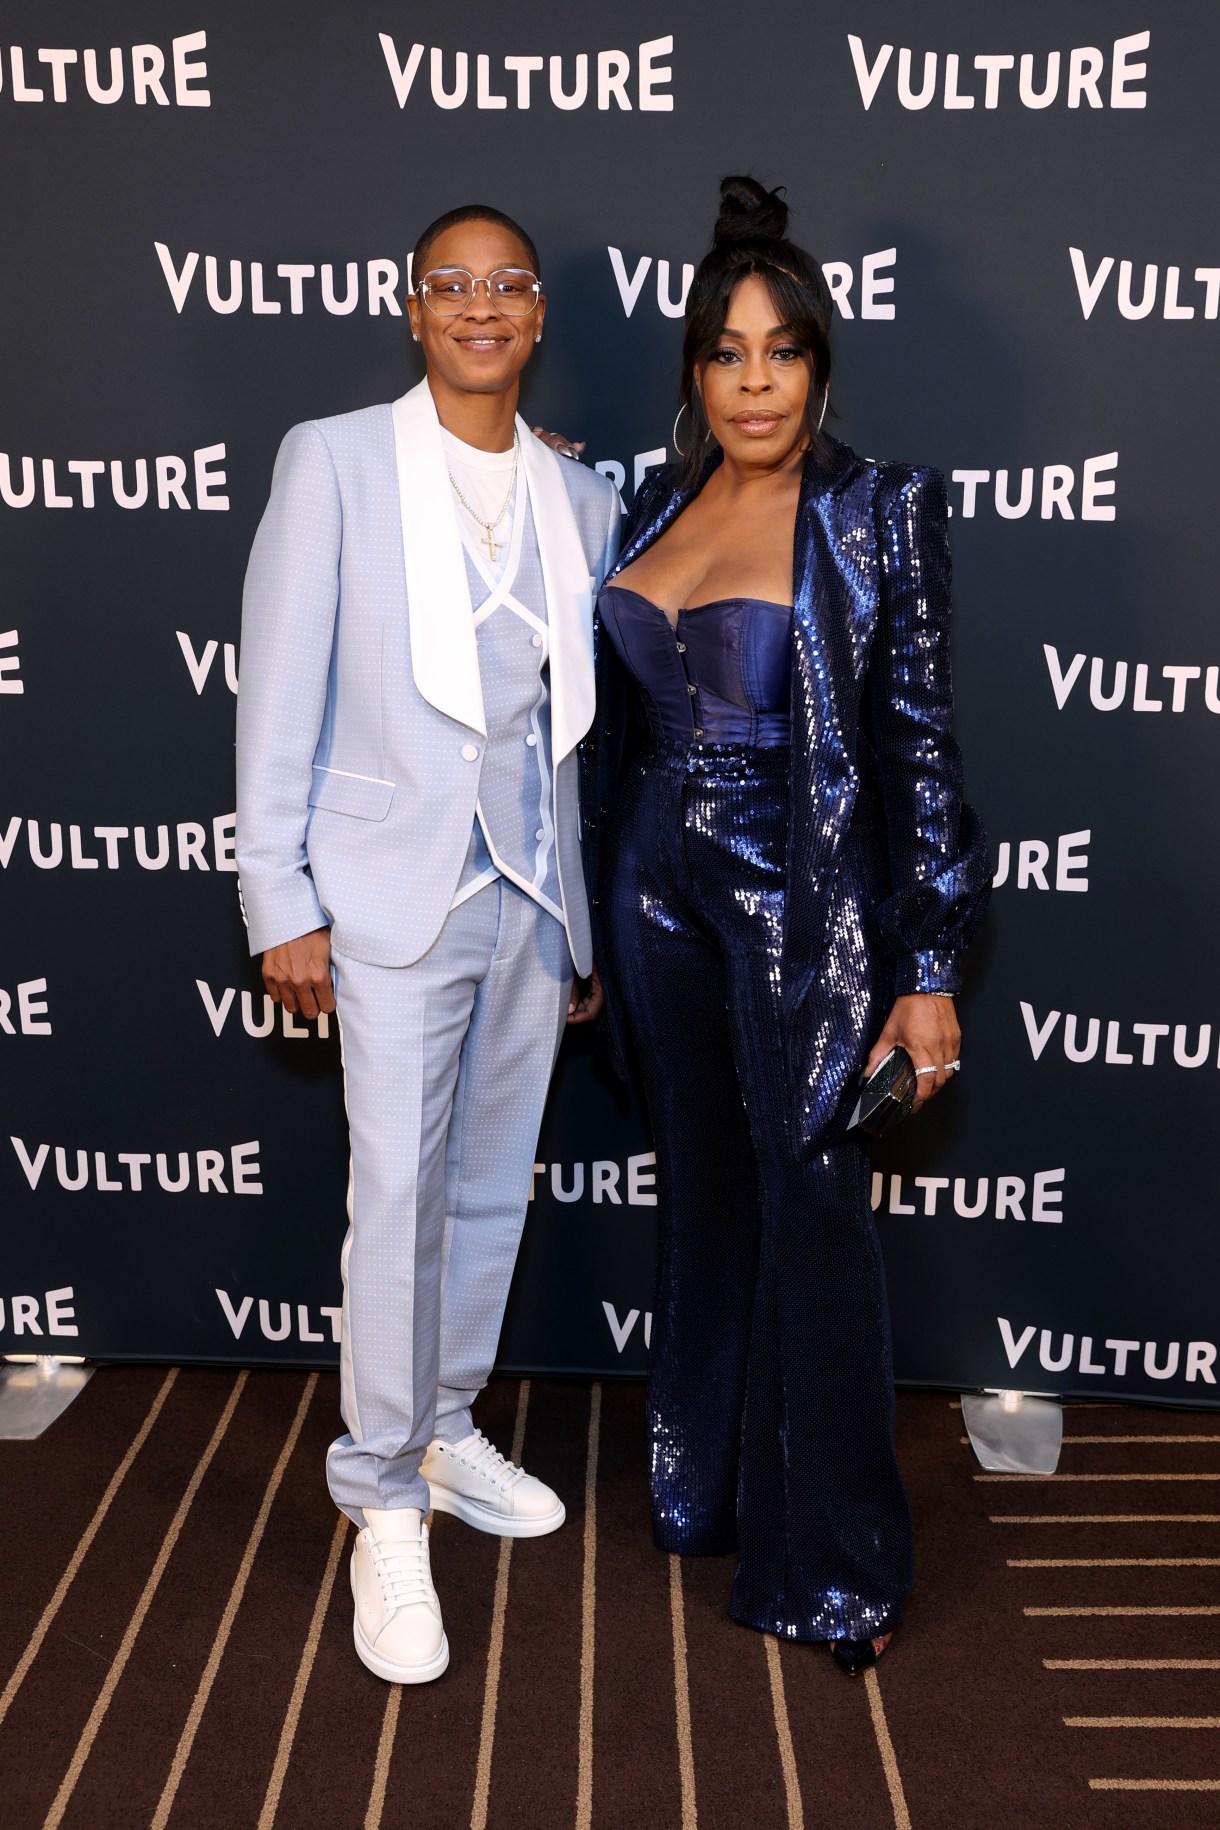 LOS ANGELES, CALIFORNIA - NOVEMBER 14: (L-R) Jessica Betts and Niecy Nash attend Vulture Festival 2021 at The Hollywood Roosevelt on November 14, 2021 in Los Angeles, California. (Photo by Rich Fury/Getty Images for Vulture)